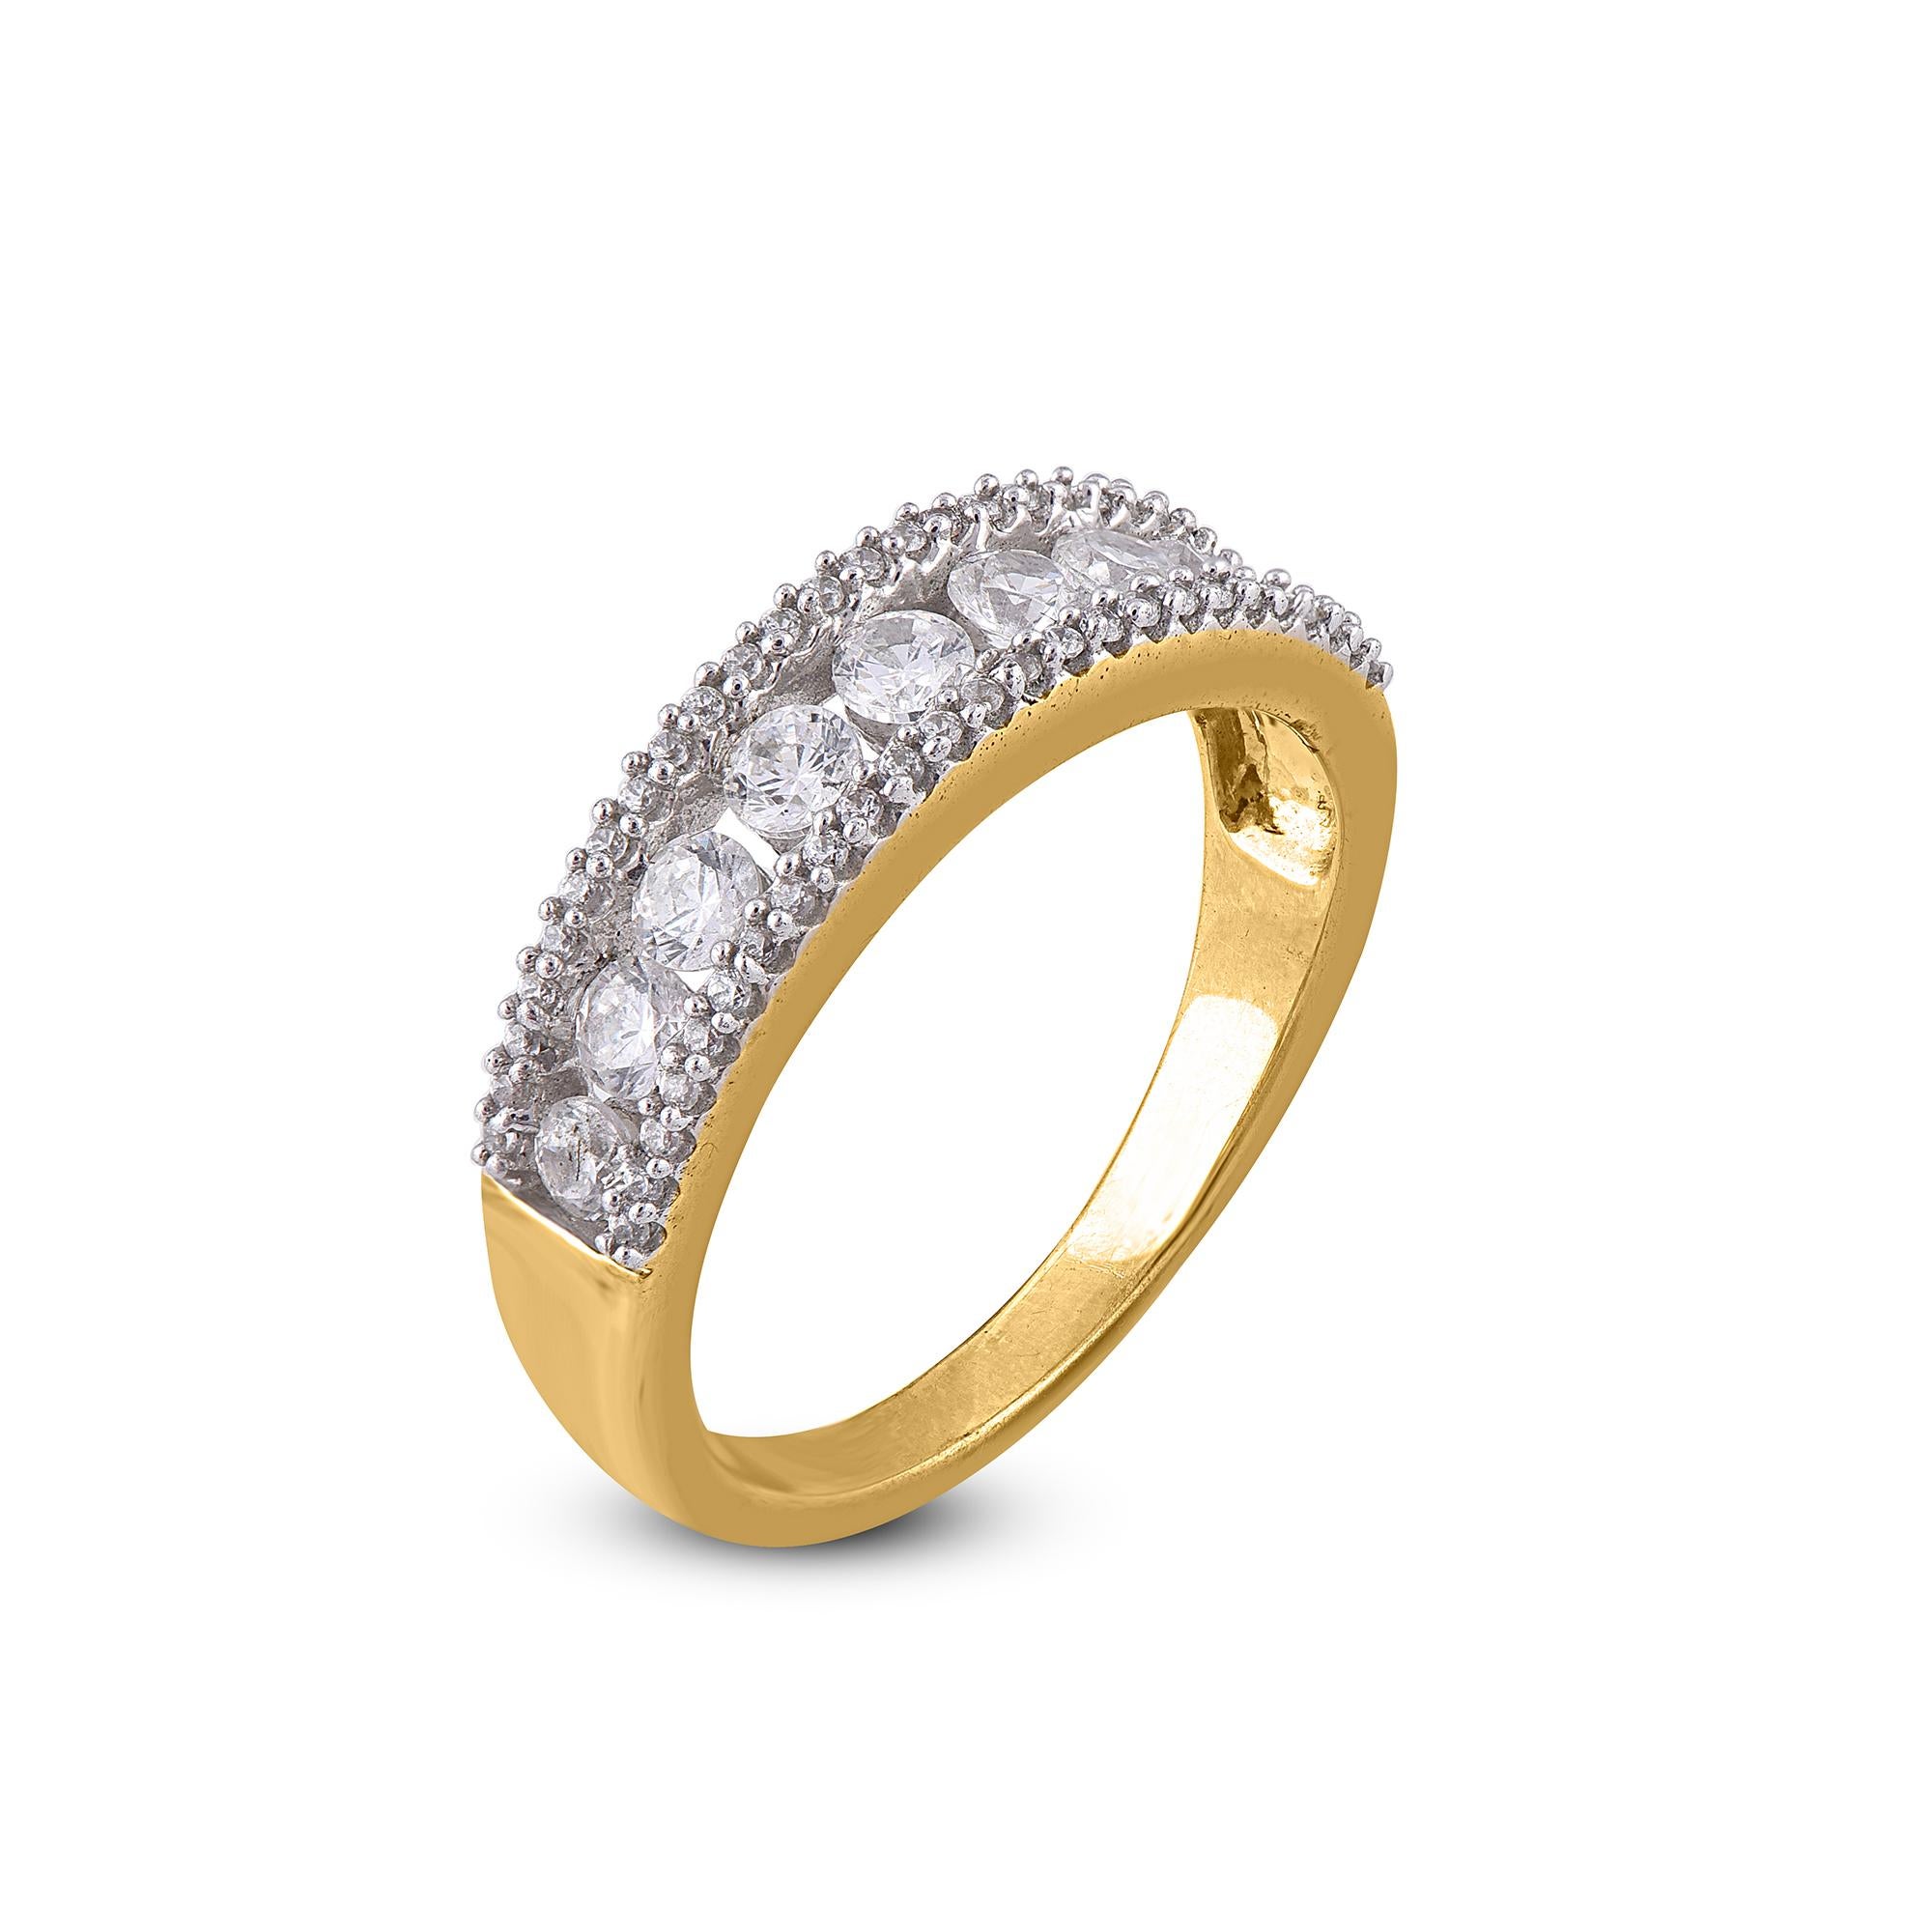 This triple row Diamond Wedding Band Ring is Accentuated with 59 round diamonds beautifully set in channel and micro-prong setting. The total diamond weight is 1.00 Carat and H-I color I2 Clarity and crafted in 14 Karat Yellow Gold
